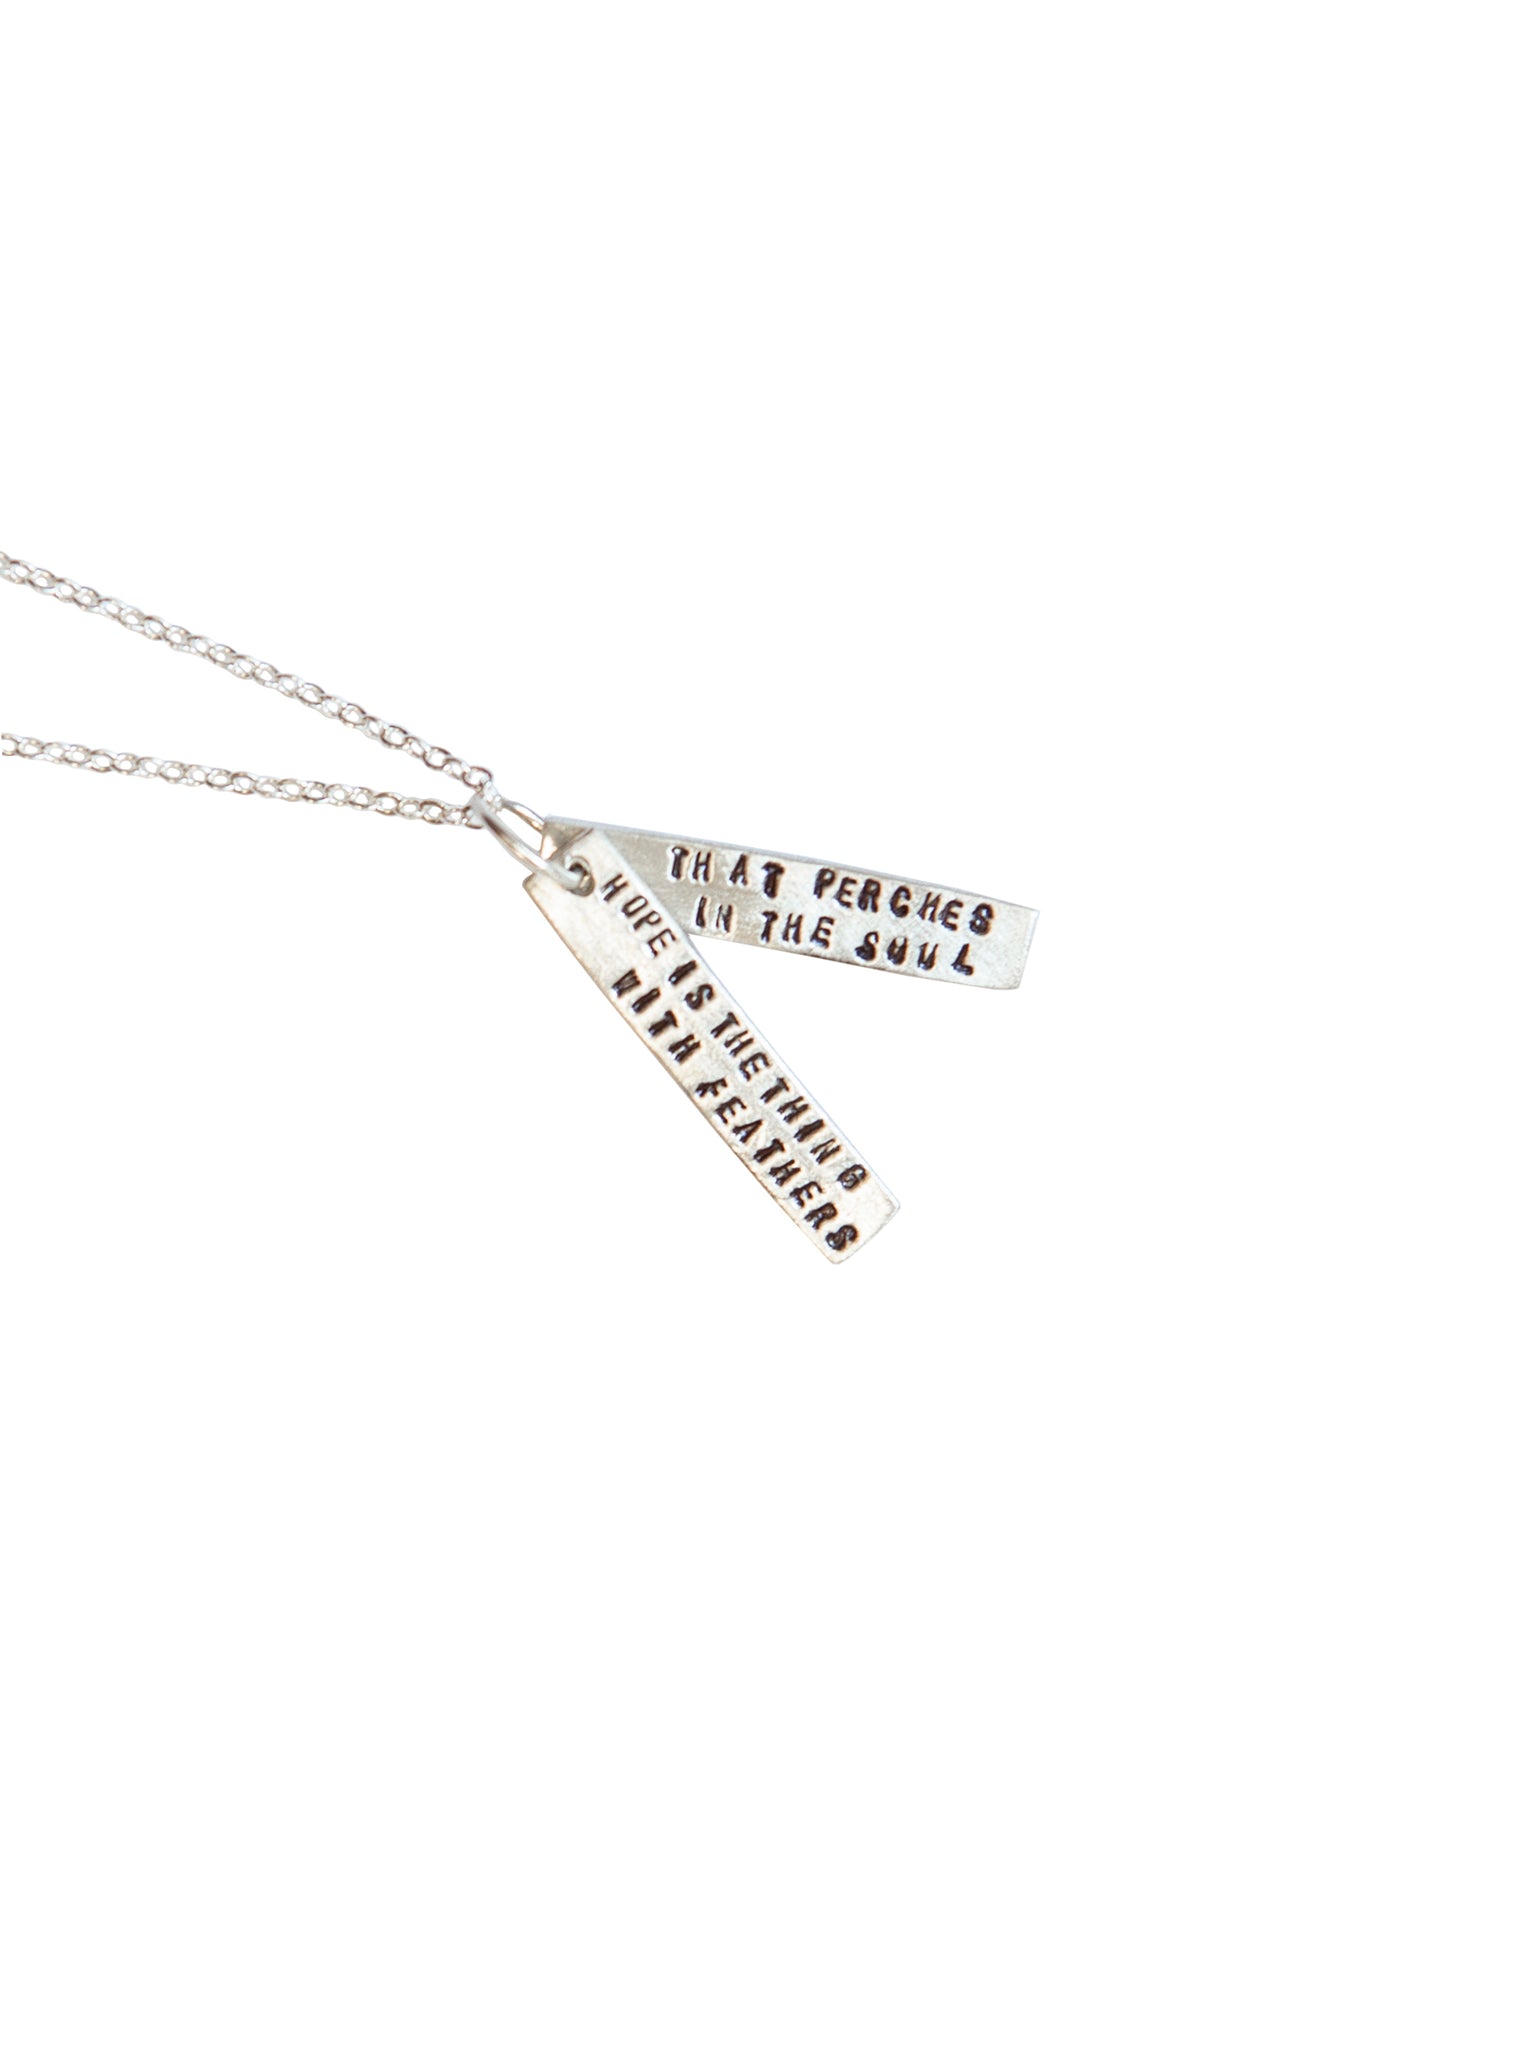 Chocolate & Steel Long-Bar Quote Necklaces Emily Dickinson Hope Silver Weston Table